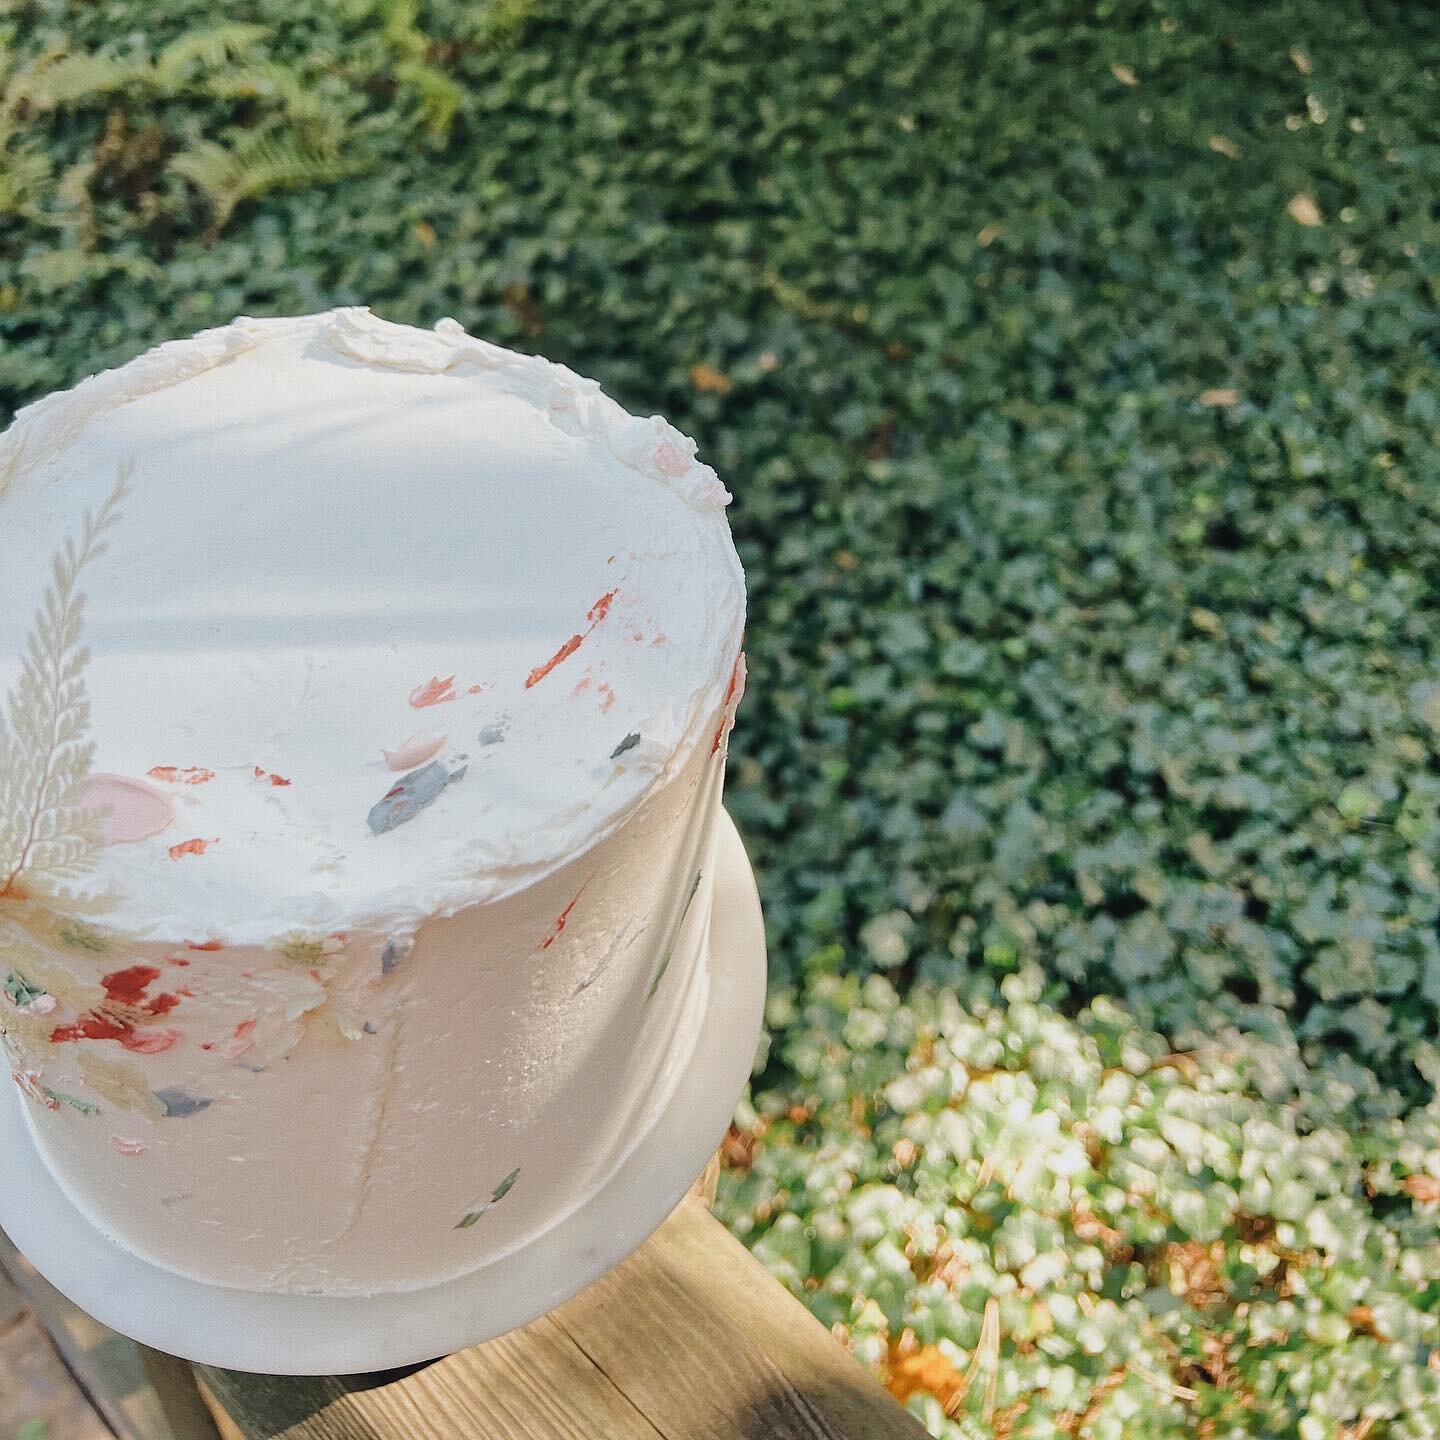 a goal of mine this year was to see texture in a new way - to become more purposeful with each stroke, movement, &amp; floral addition

this little six inch cutting cake was pumpkin spice with cream cheese frosting &amp; I really loved what the mixed